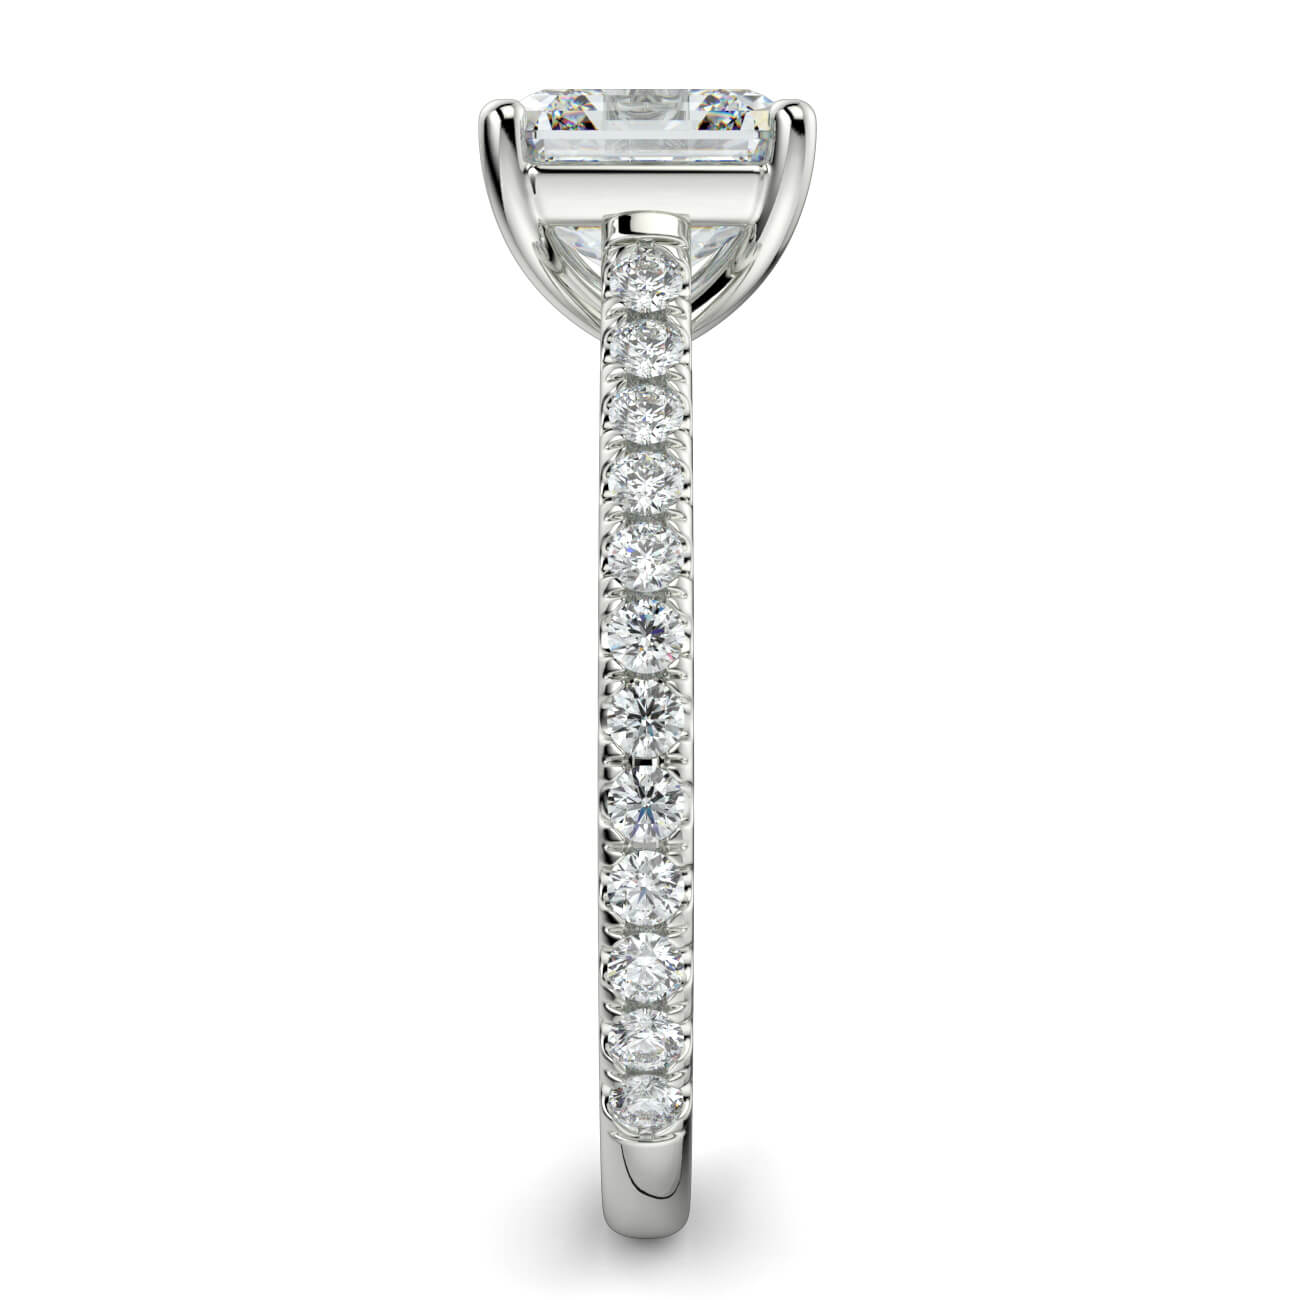 Asscher Cut diamond cathedral engagement ring in white gold – Australian Diamond Network